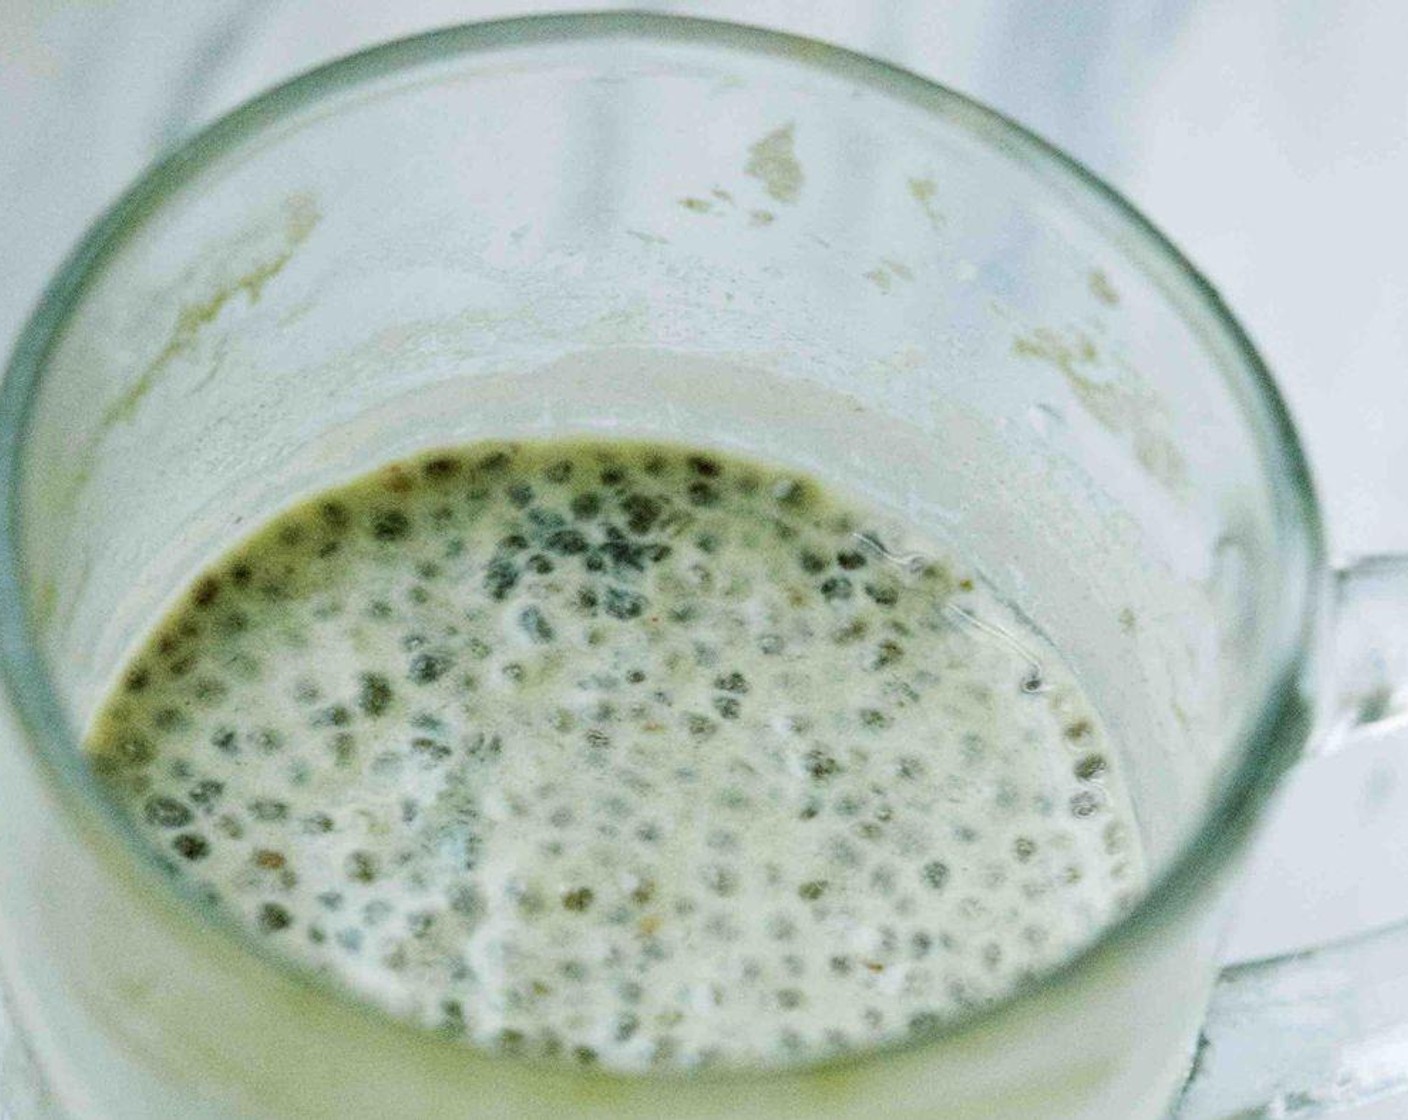 step 1 Stir Matcha Powder (1 tsp) into the Cashew Milk (1 cup), add Chia Seeds (1/4 cup) and refrigirate overnight.